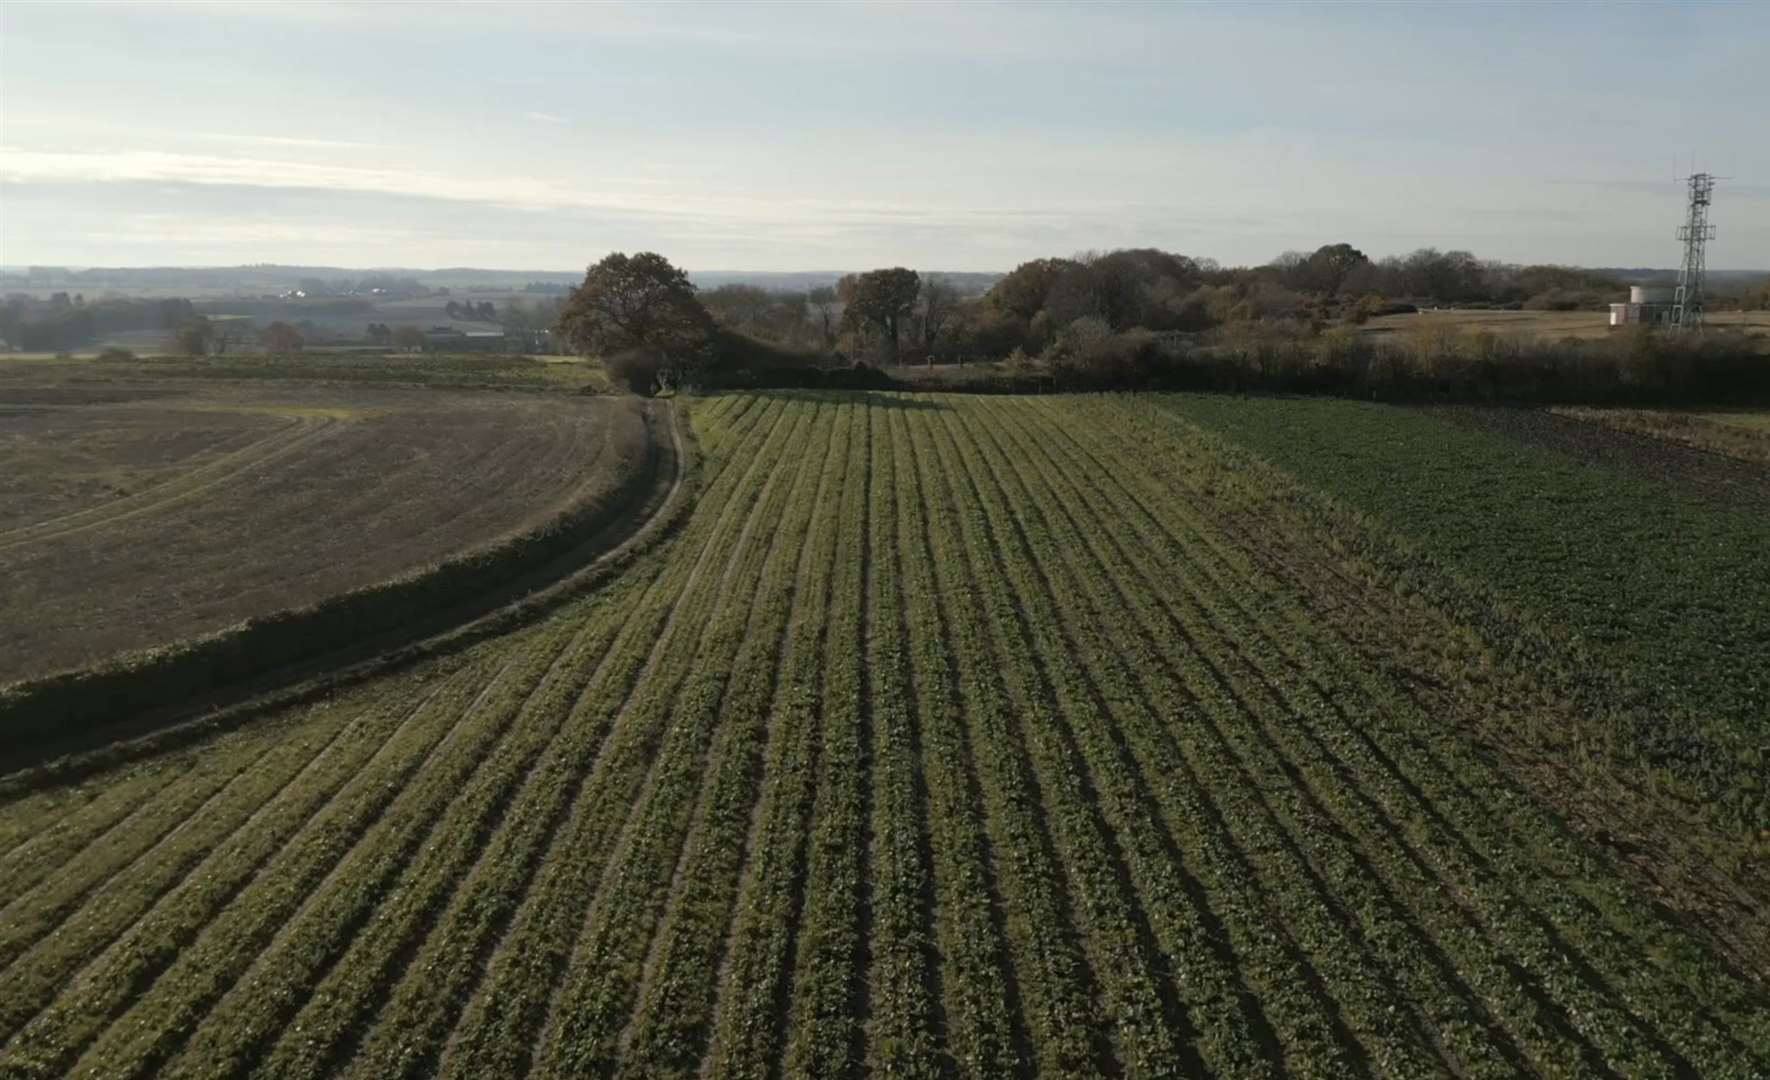 There are worries that too much farmland in Kent will be lost to housing